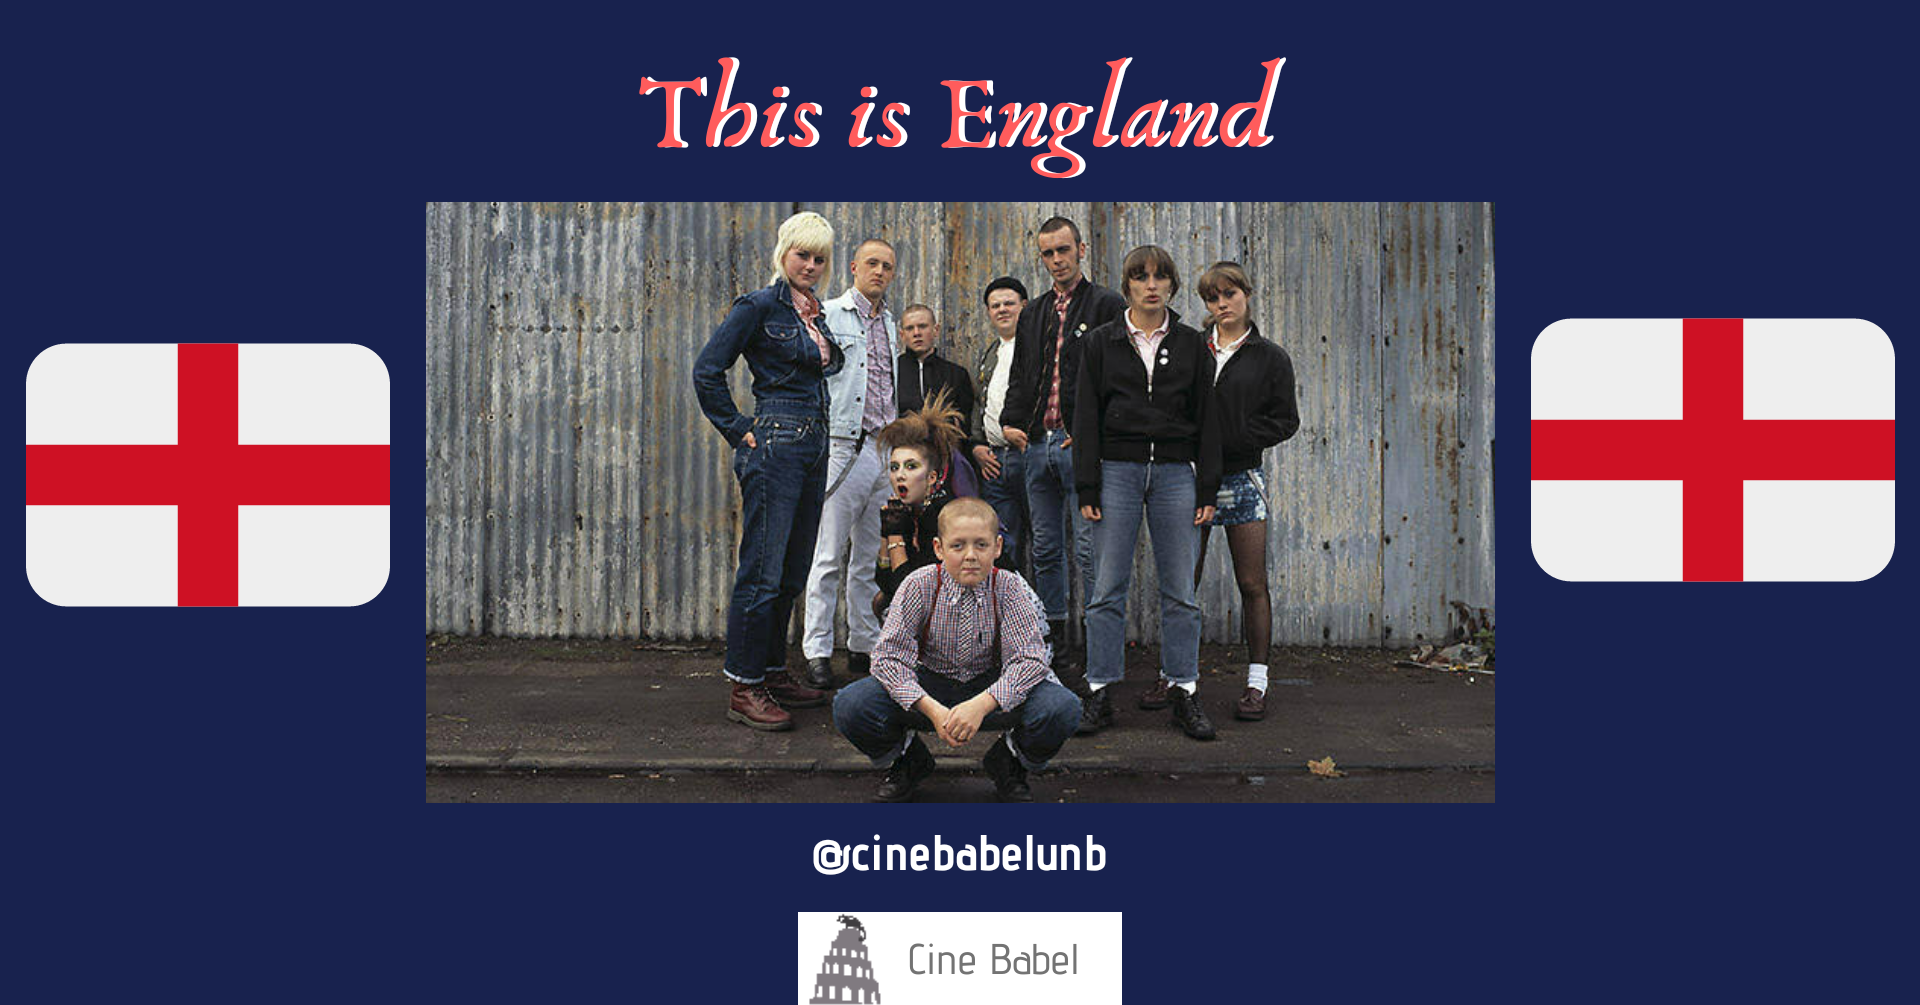  Cine Babel: This is England